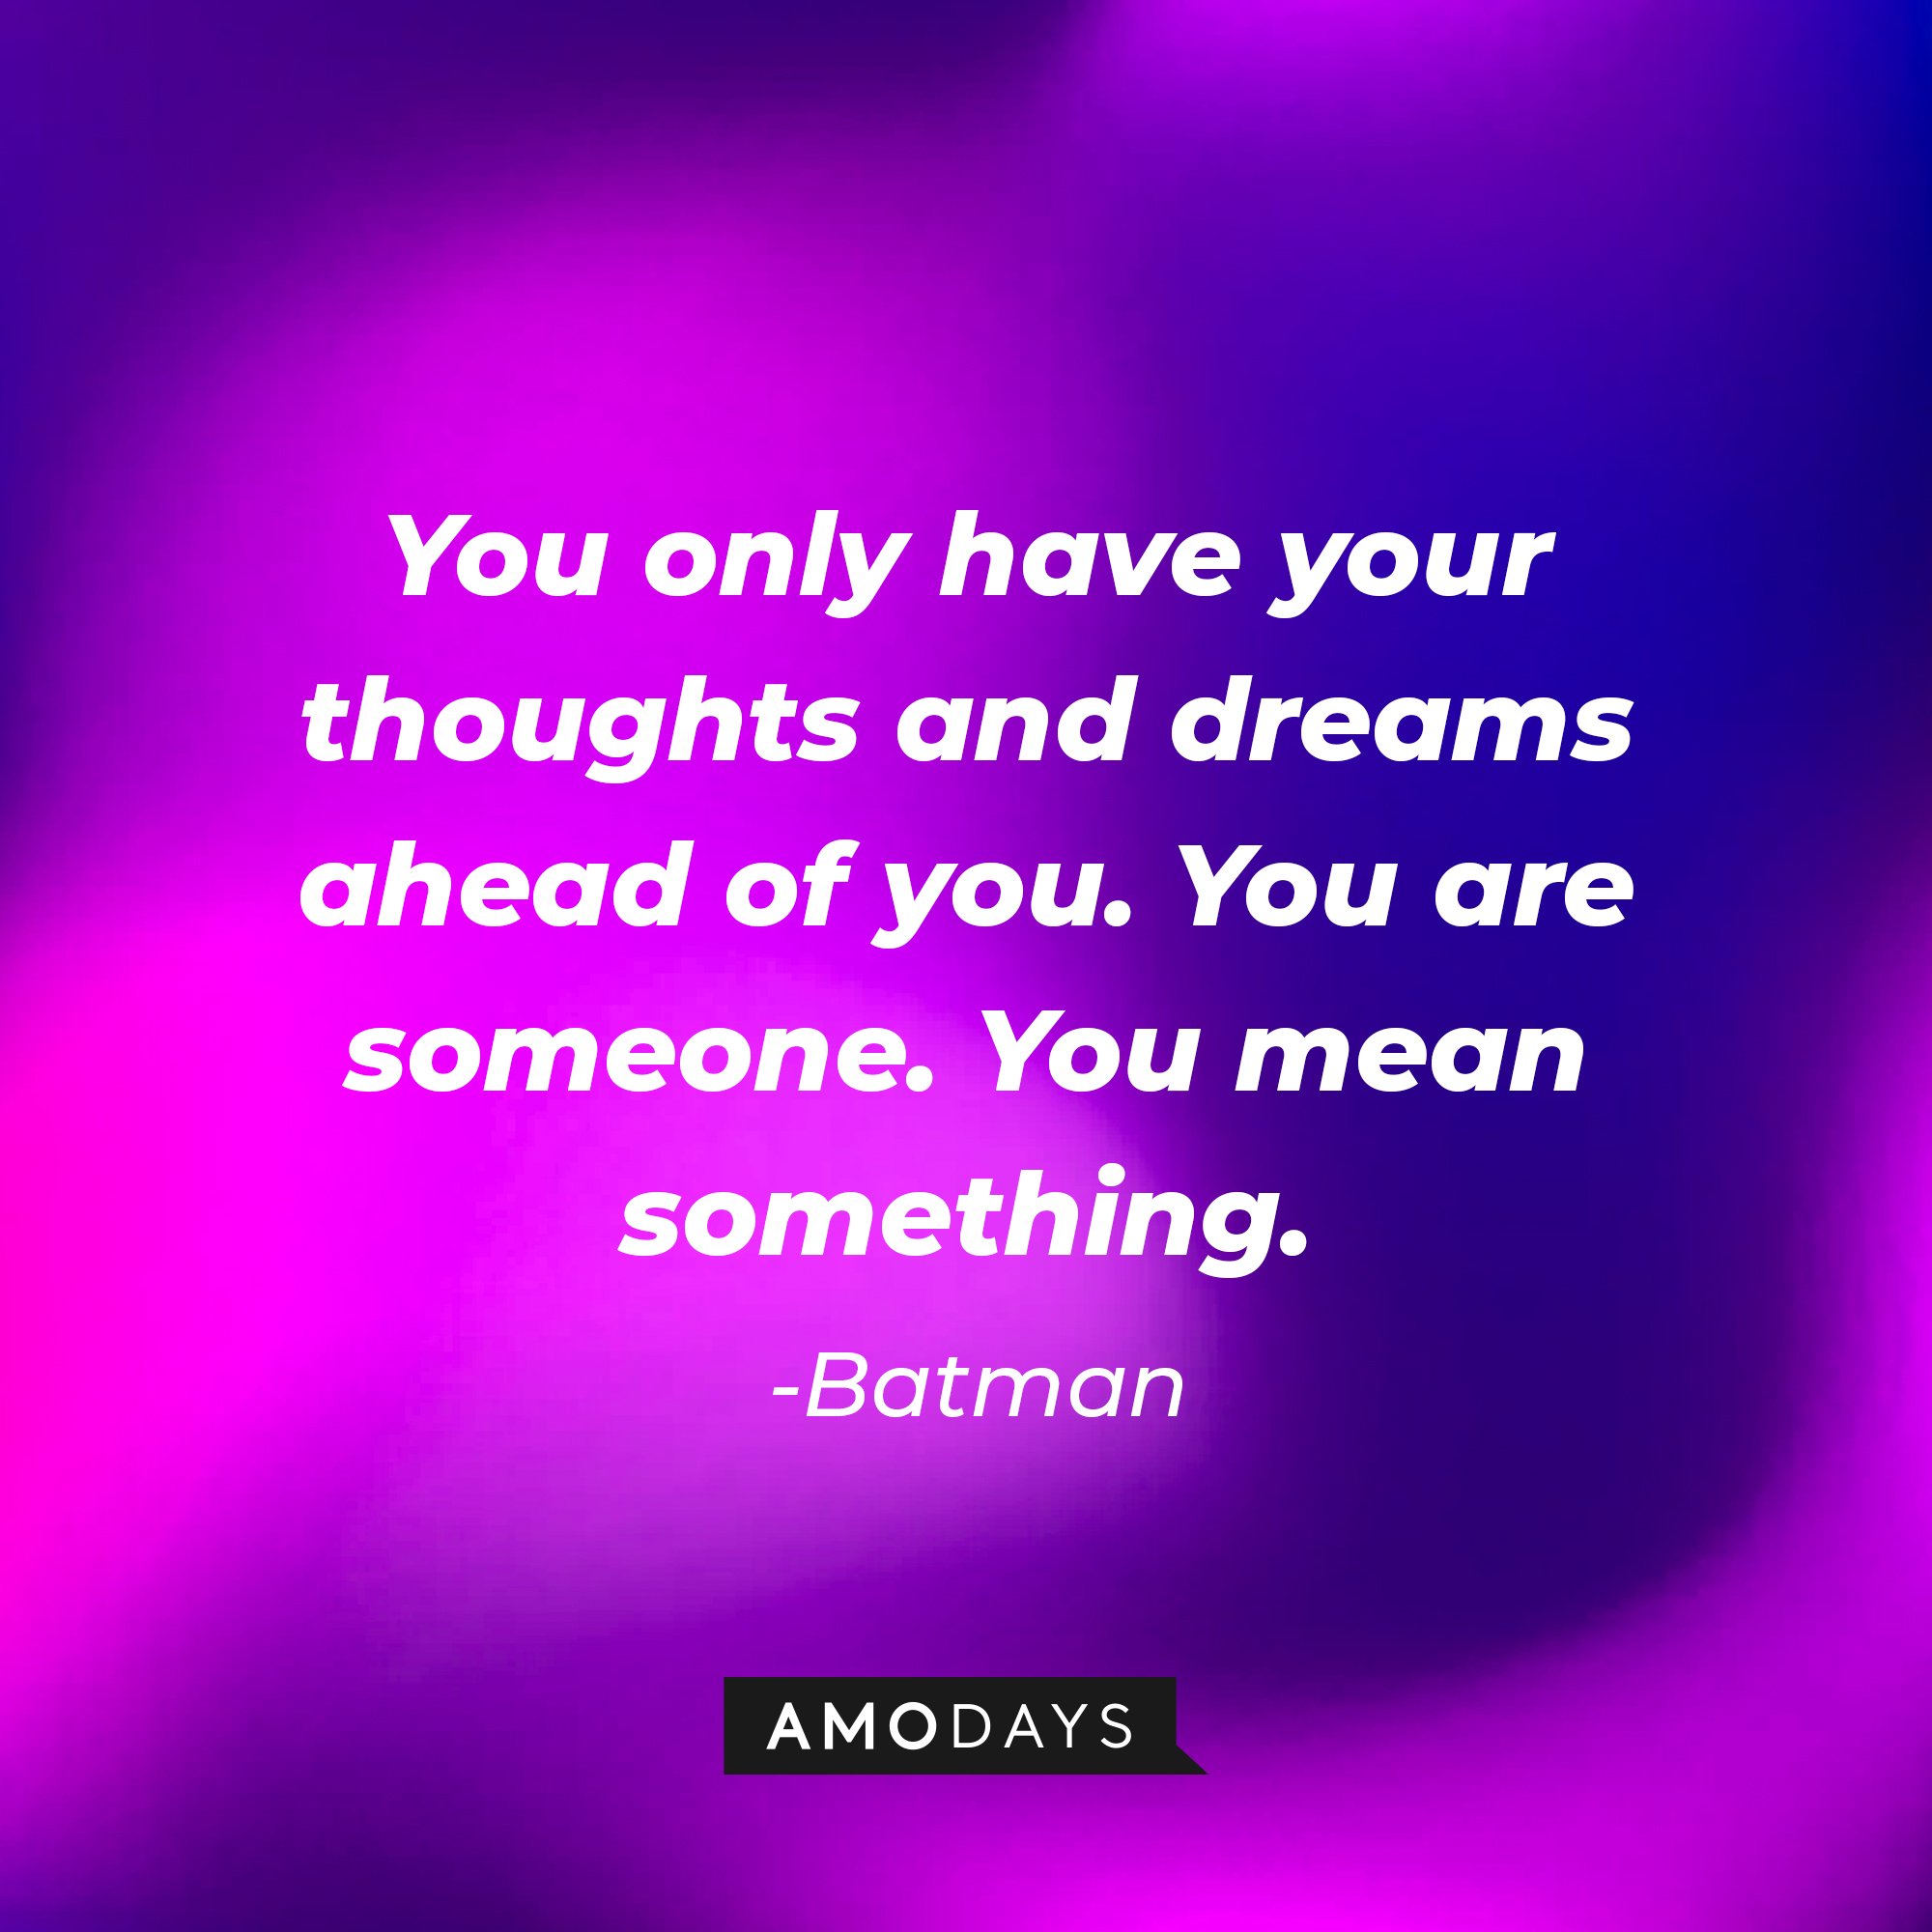 Batman's quote: “You only have your thoughts and dreams ahead of you. You are someone. You mean something.” | Image: AmoDays